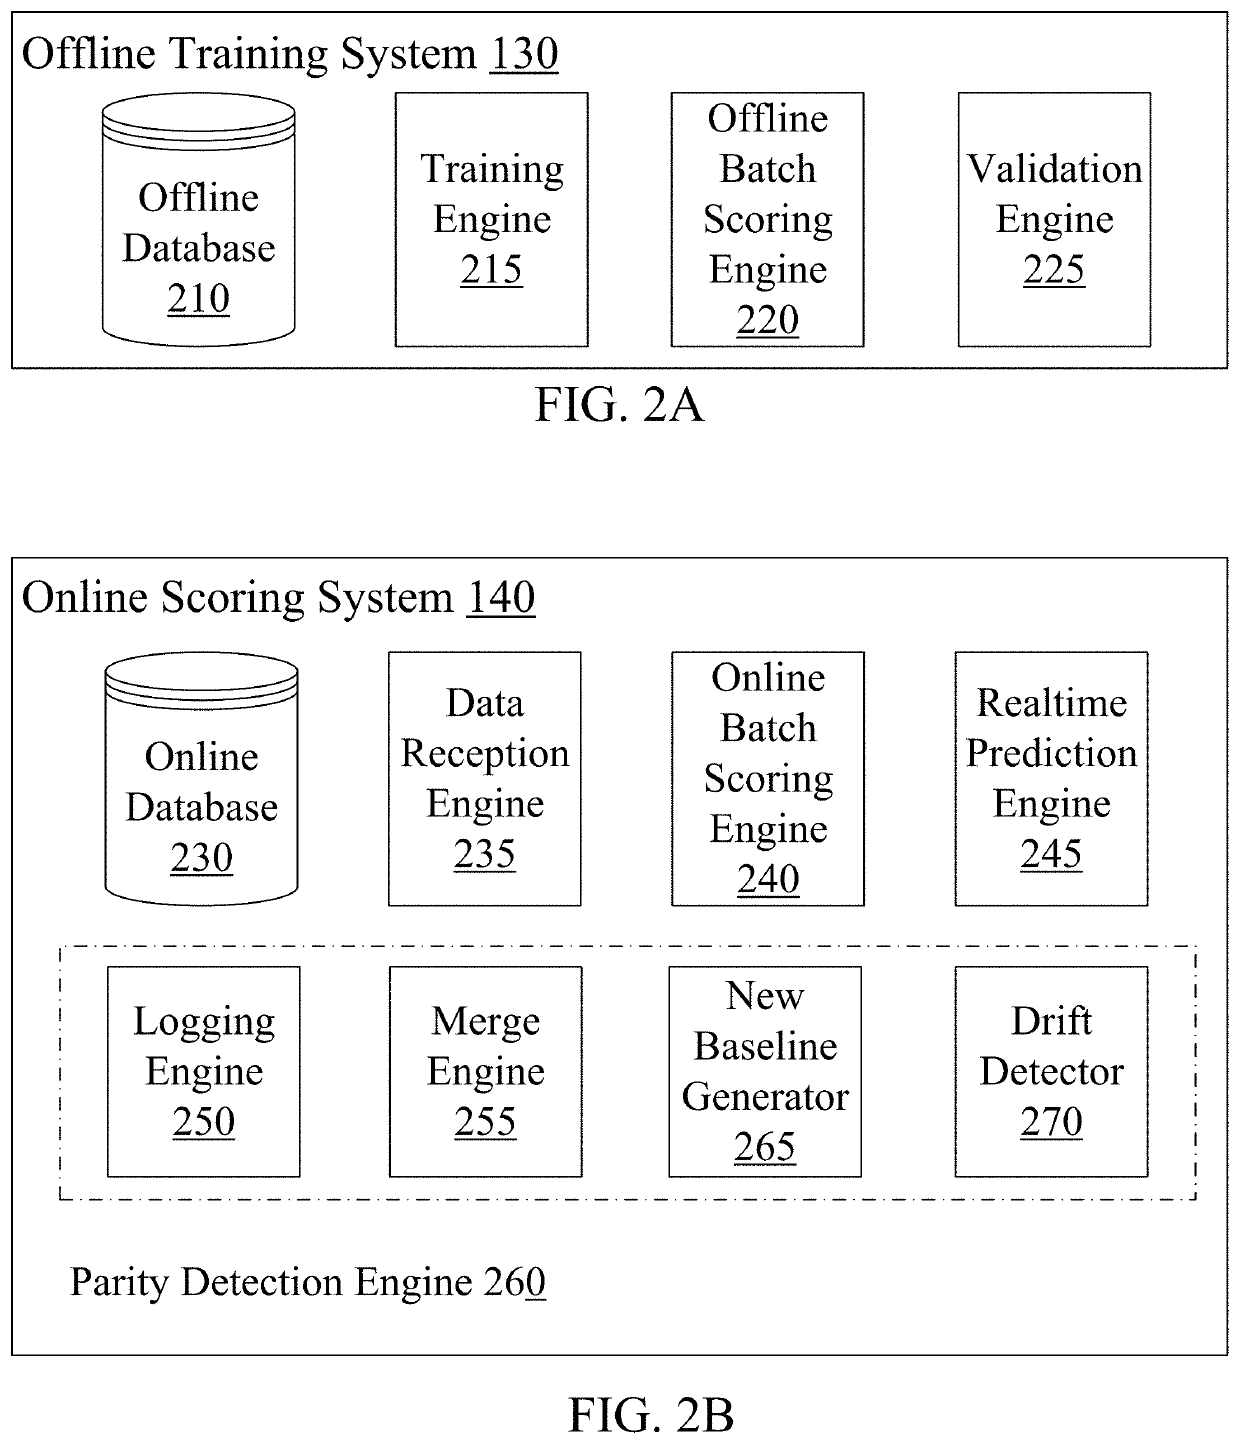 Real-time drift detection in machine learning systems and applications